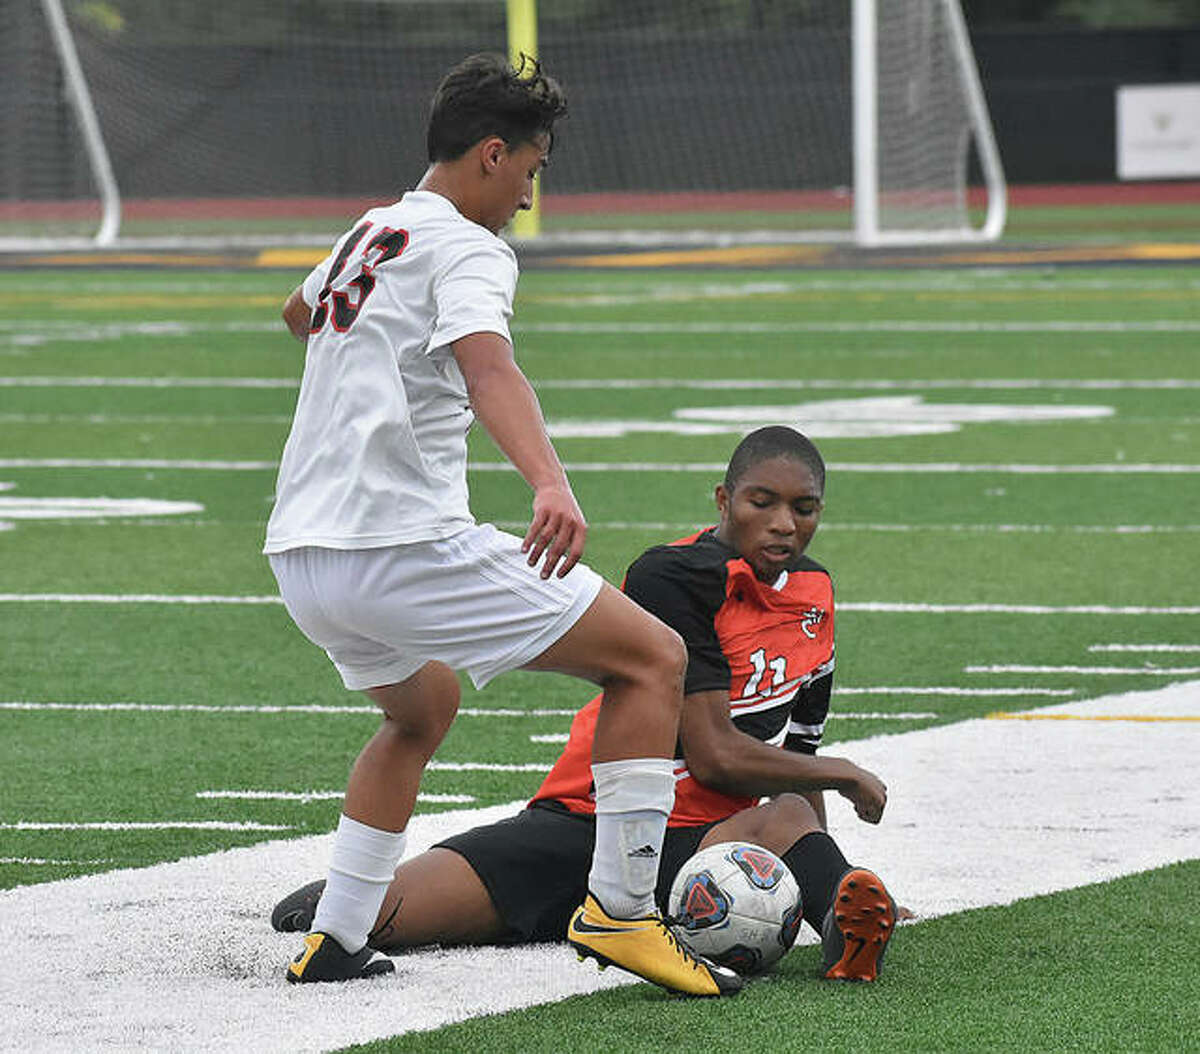 Edwardsville midfielder Tony Agwuedu attempts a diving tackle in the first half.